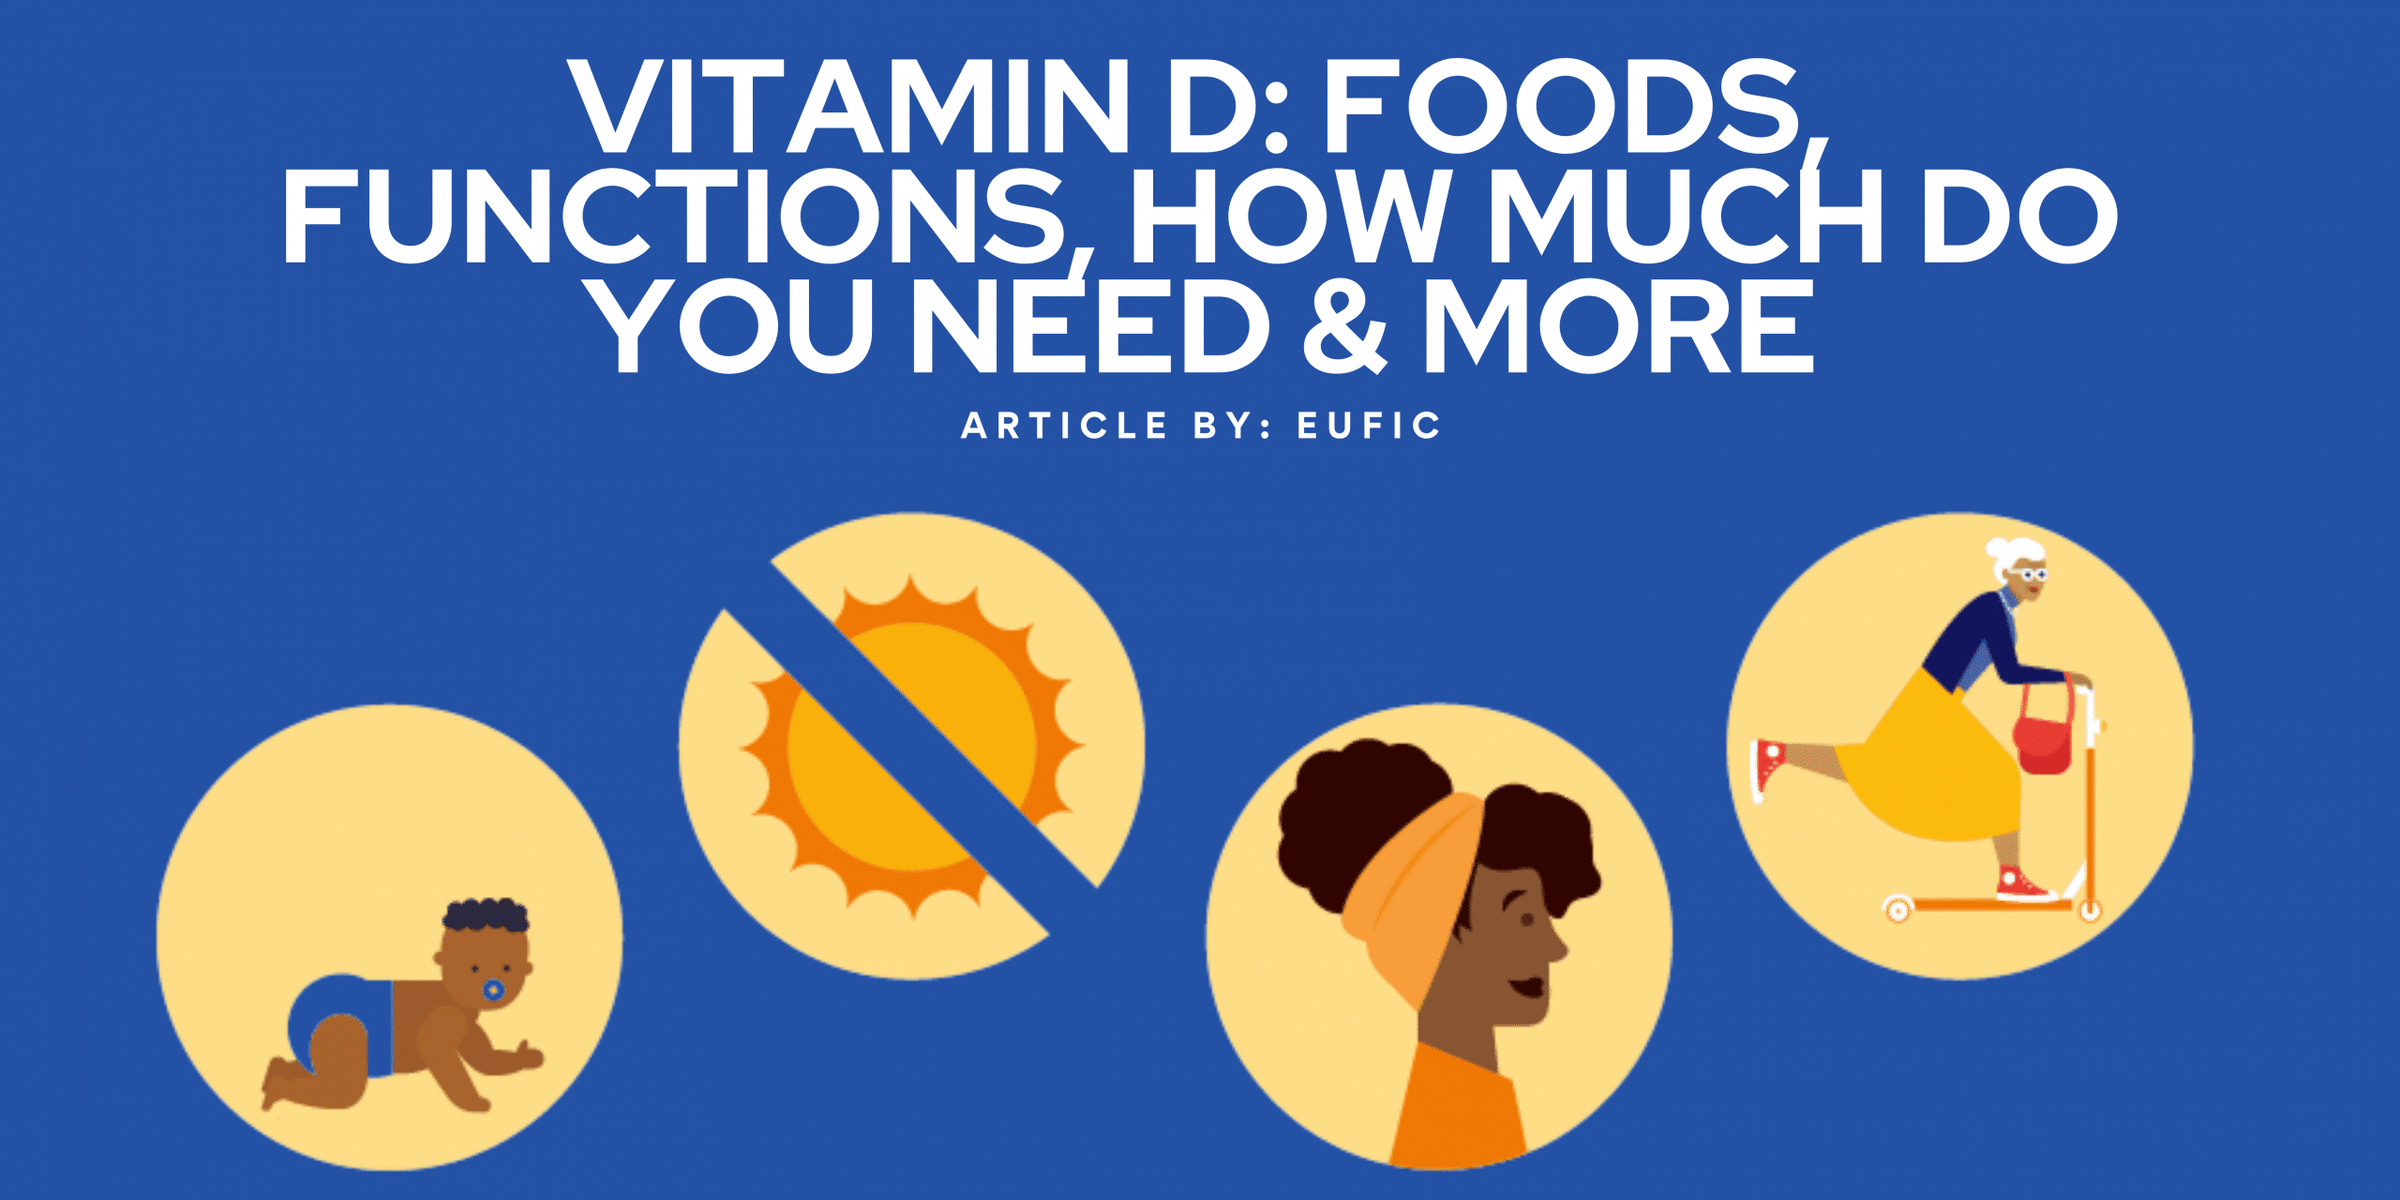 Vitamin D: Foods, Functions, How Much Do You Need And More Image